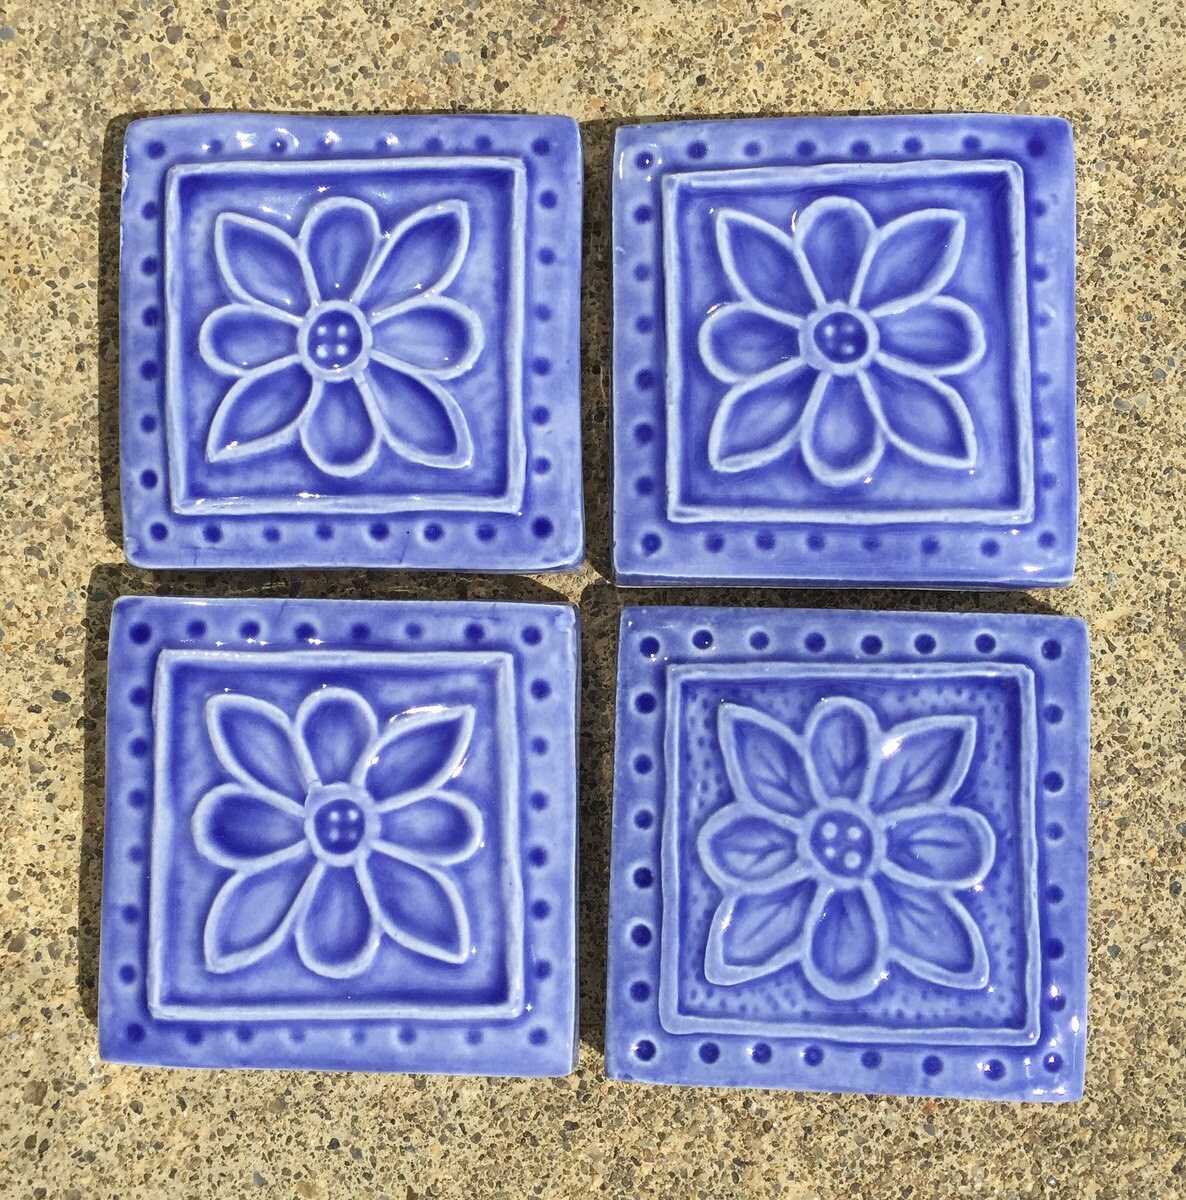 2x2 Ceramic Accent Tile Set of 4 Handmade Accent tiles in